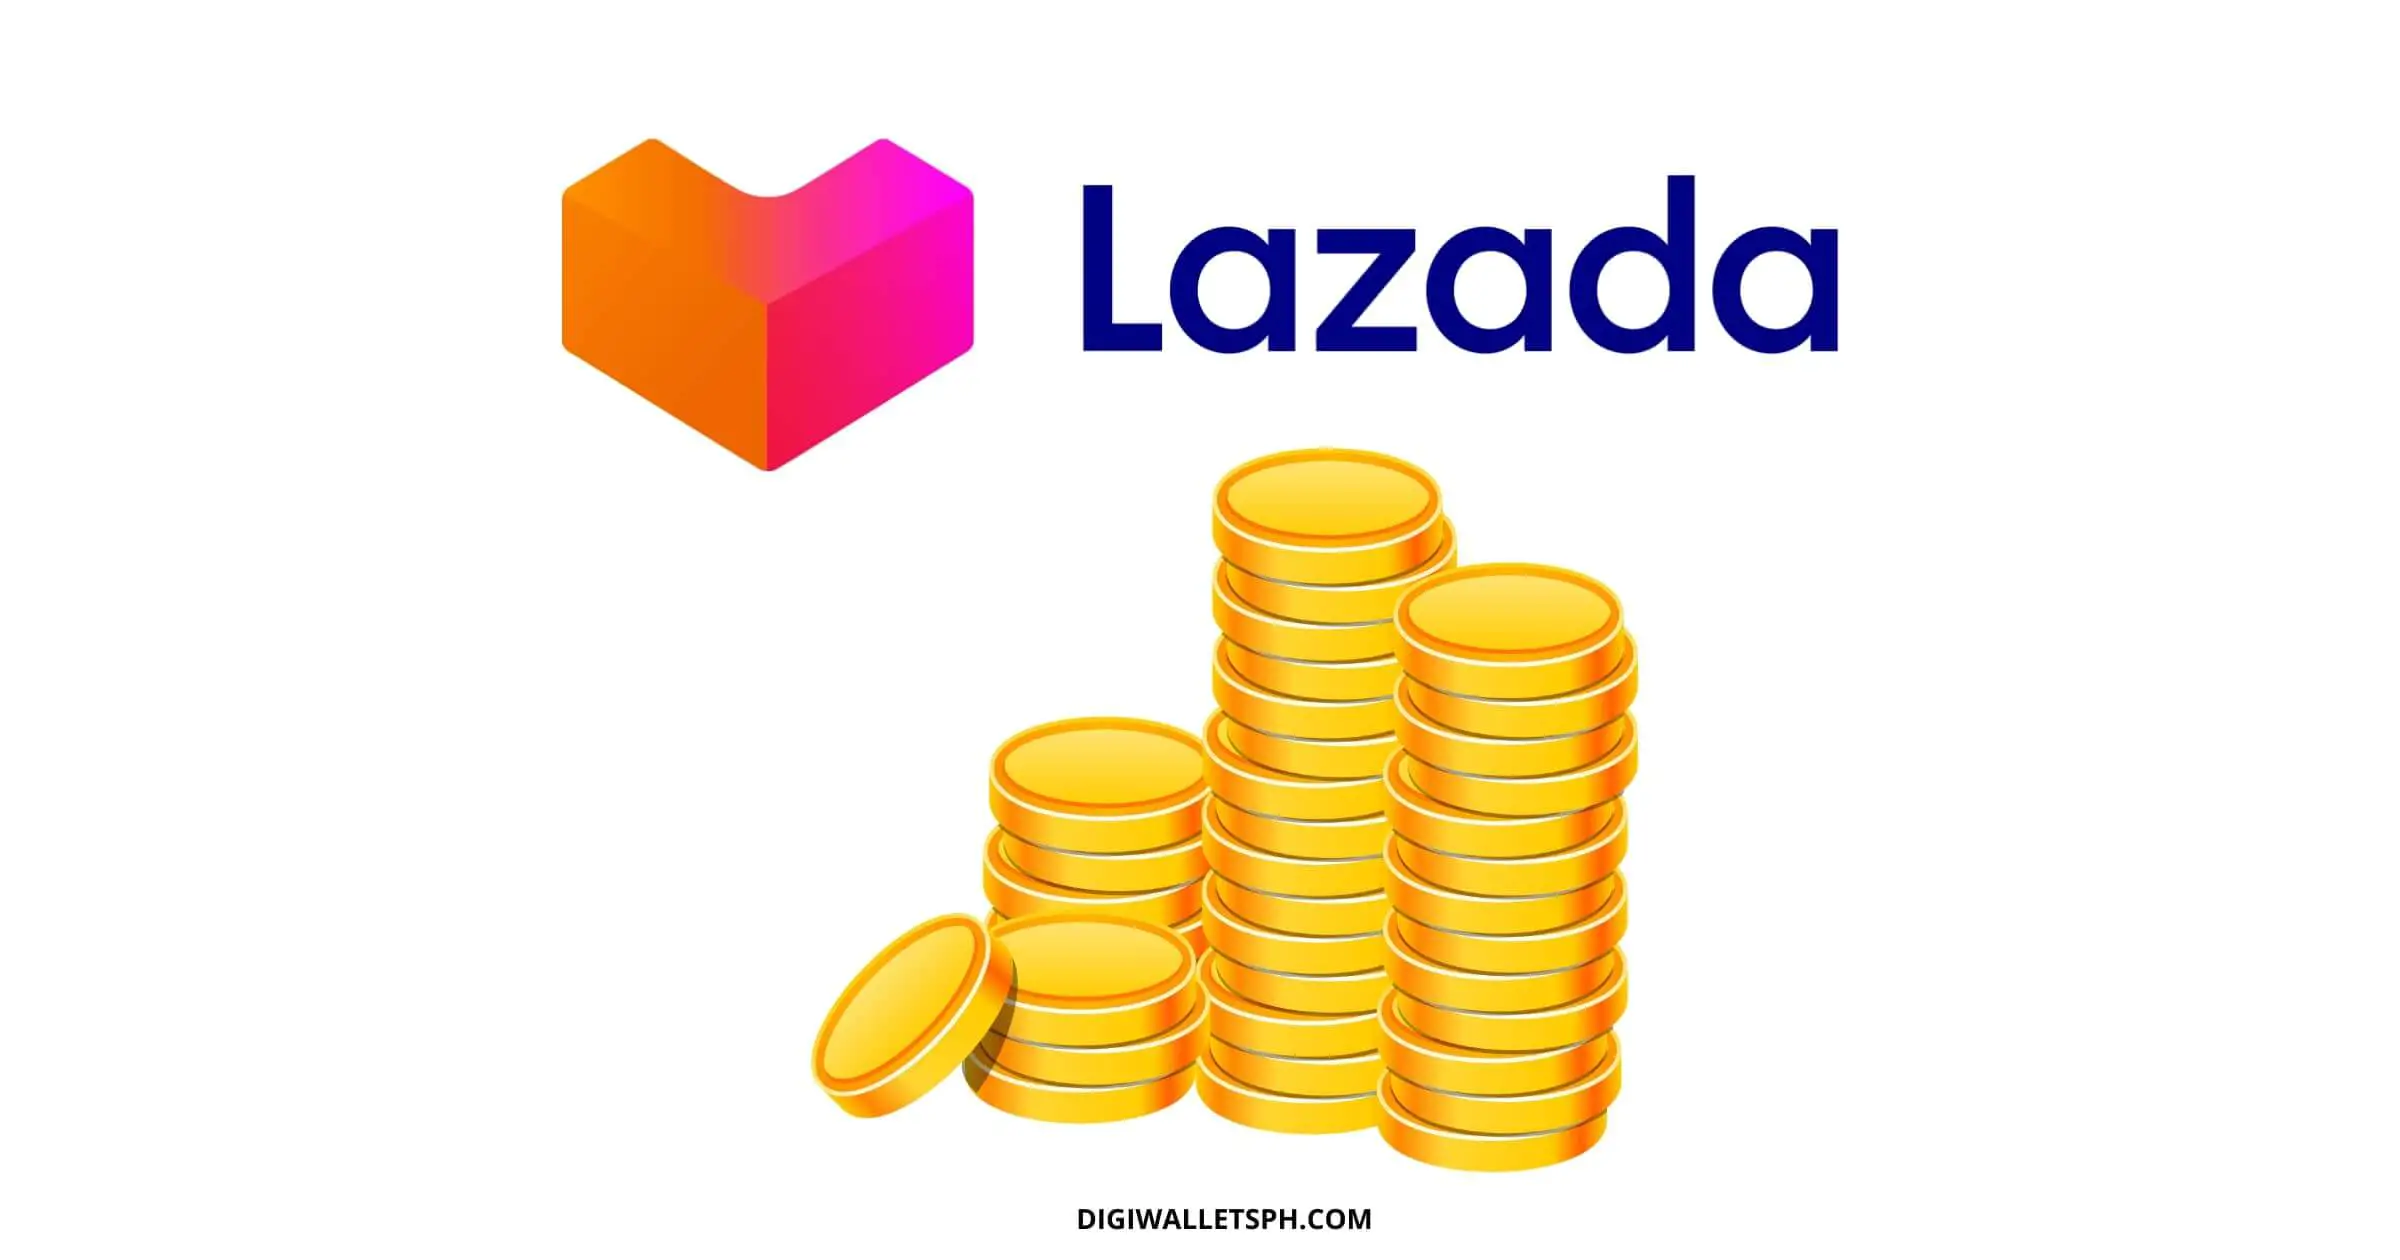 How to use Lazada coins